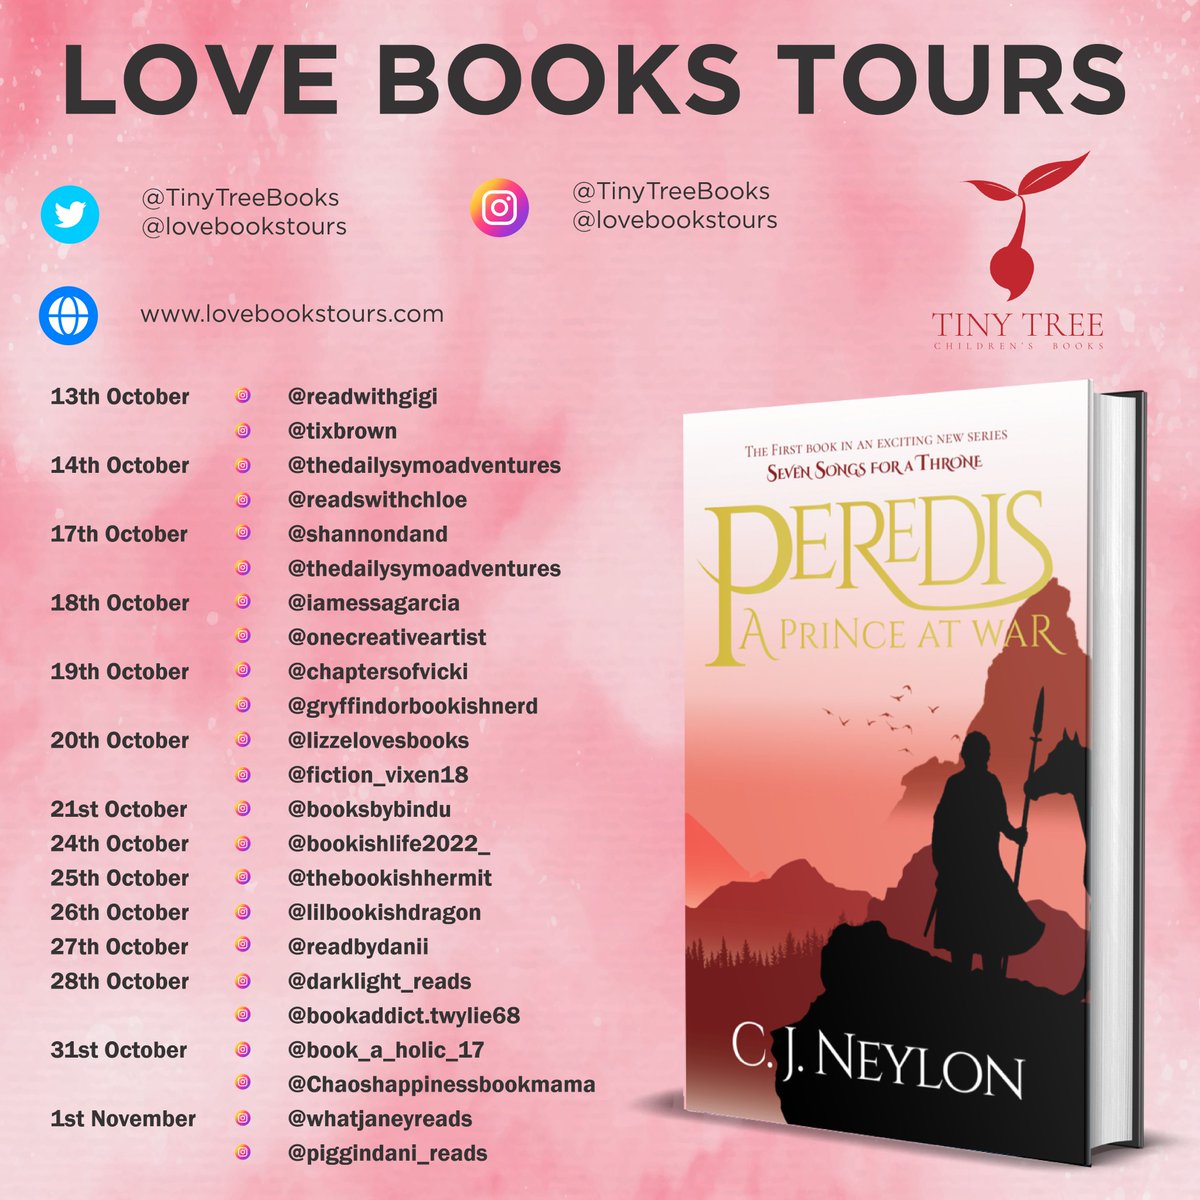 Virtual Book Tour Alert Coming soon is the #virtualbooktour for Peredis by C.J. Neylon @TinyTreeBooksorganised by @lovebookstours @KellyAlacey 🛒bit.ly/3fl0i56 kellylacey.com/love-books-tou… #Bookreview #BookTwitter #VirtualBookTour #BlogTour